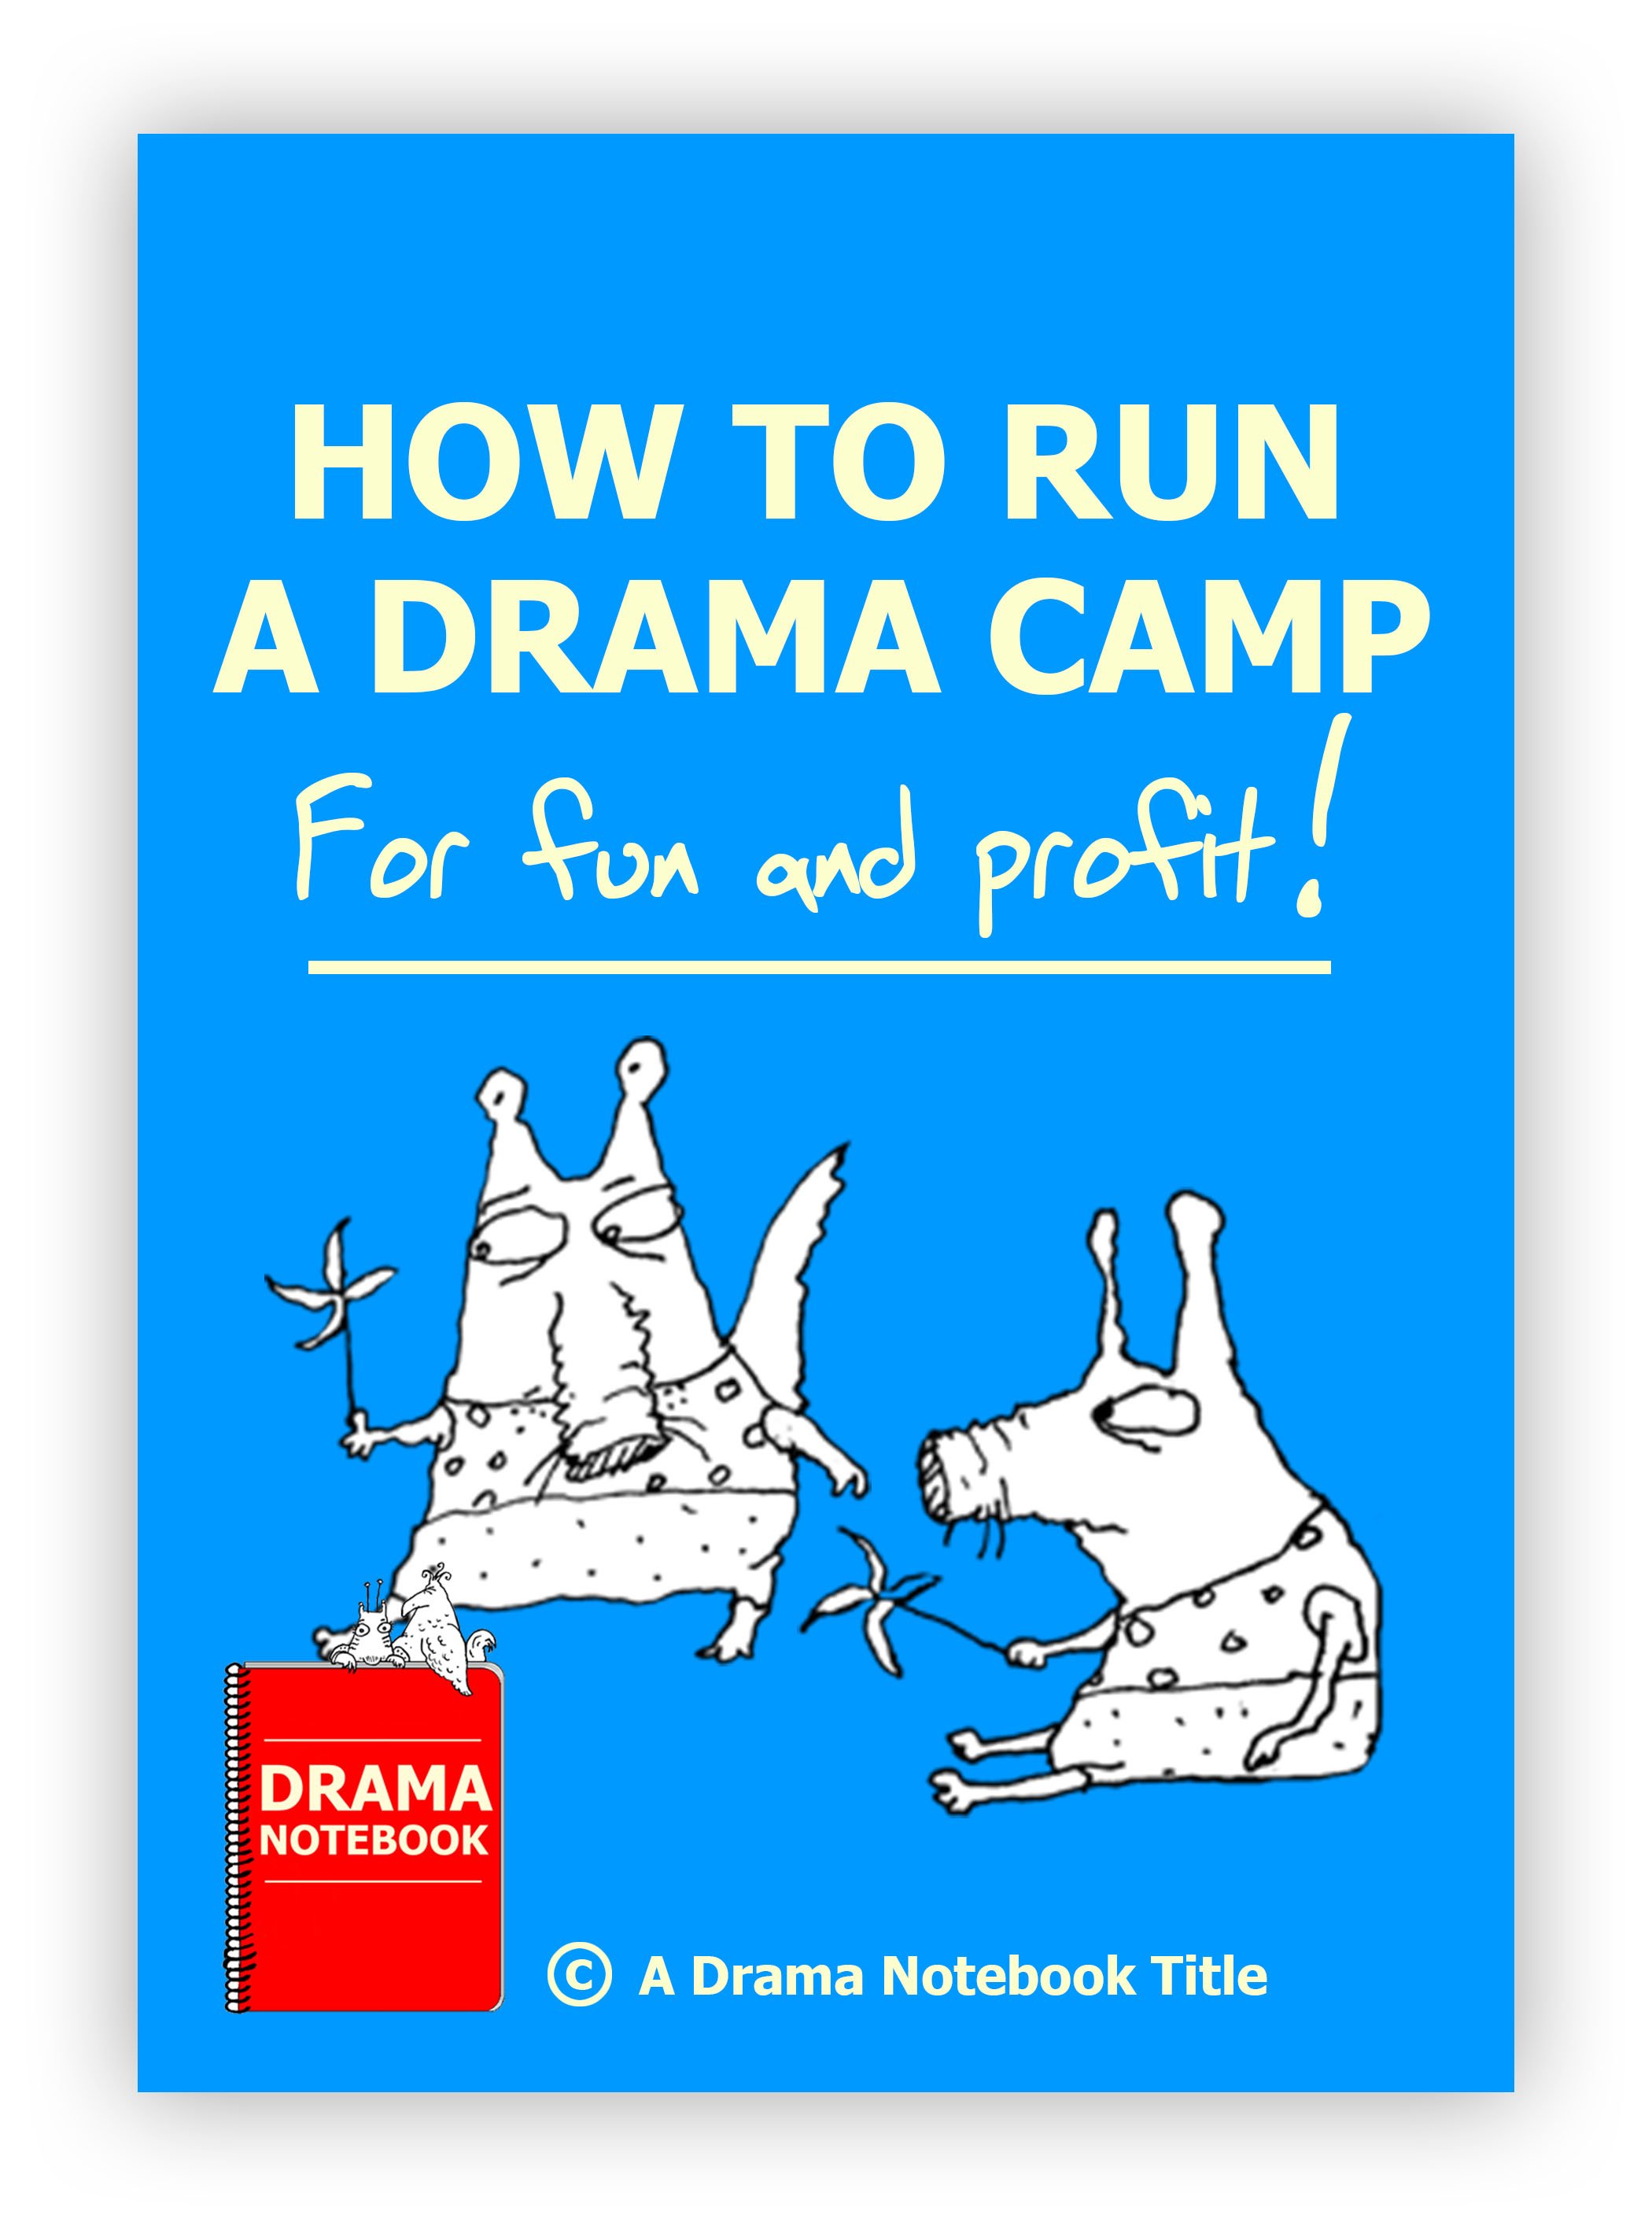 New Lessons  Drama Notebook